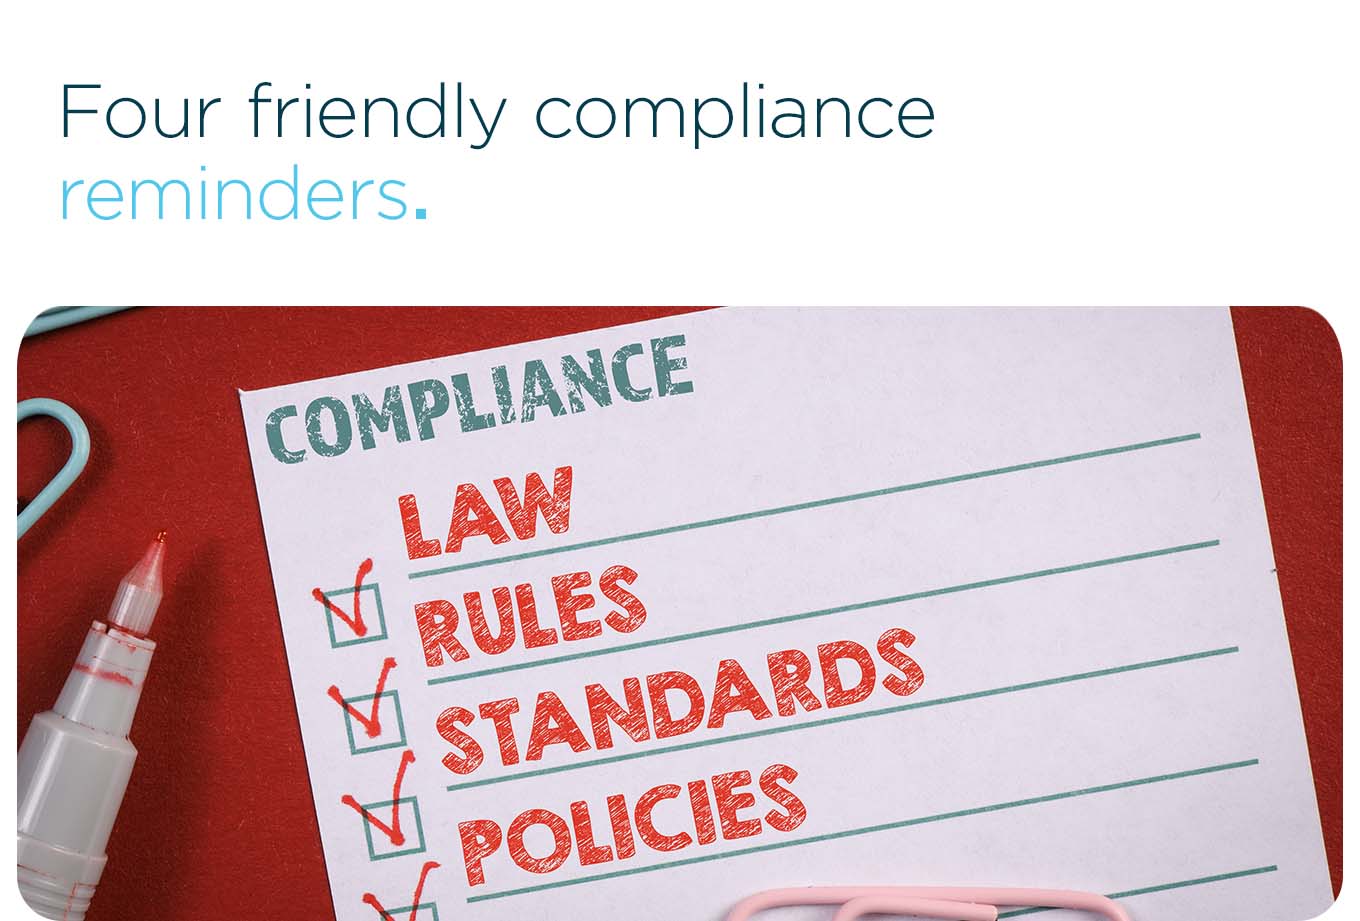 Four friendly compliance reminders.